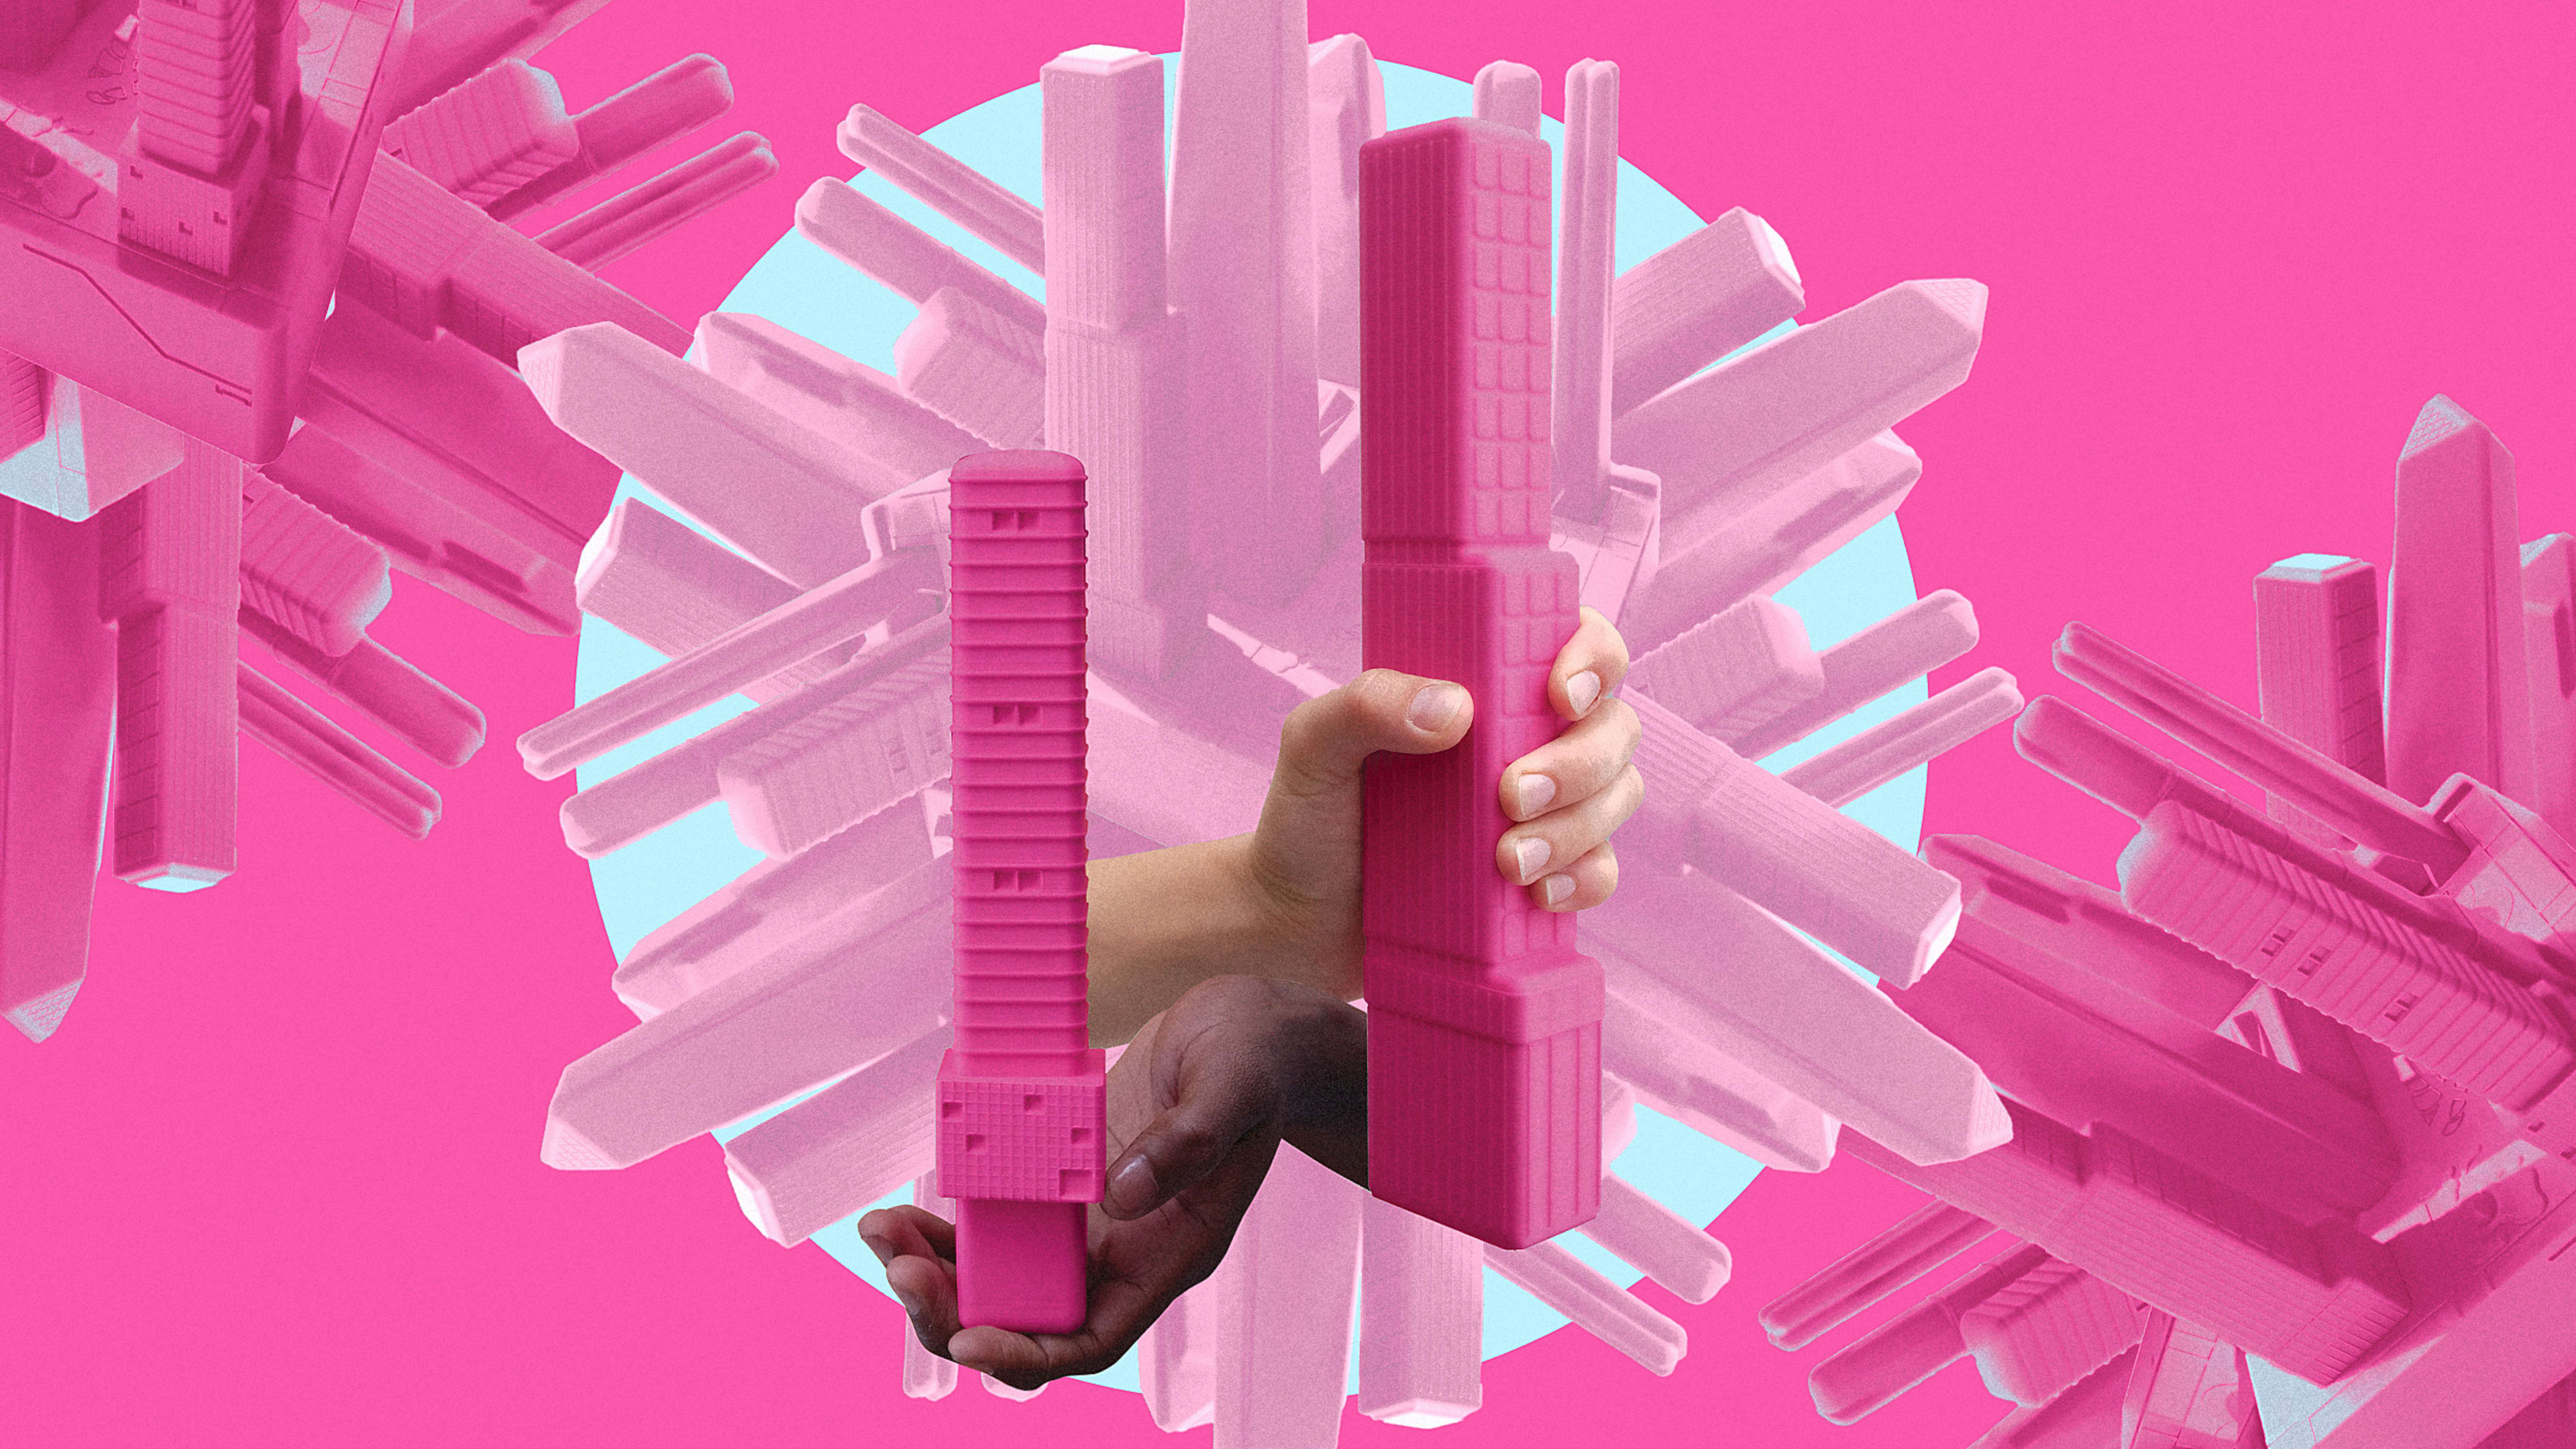 The best gift for people who are really into architecture? Skyscraper sex toys